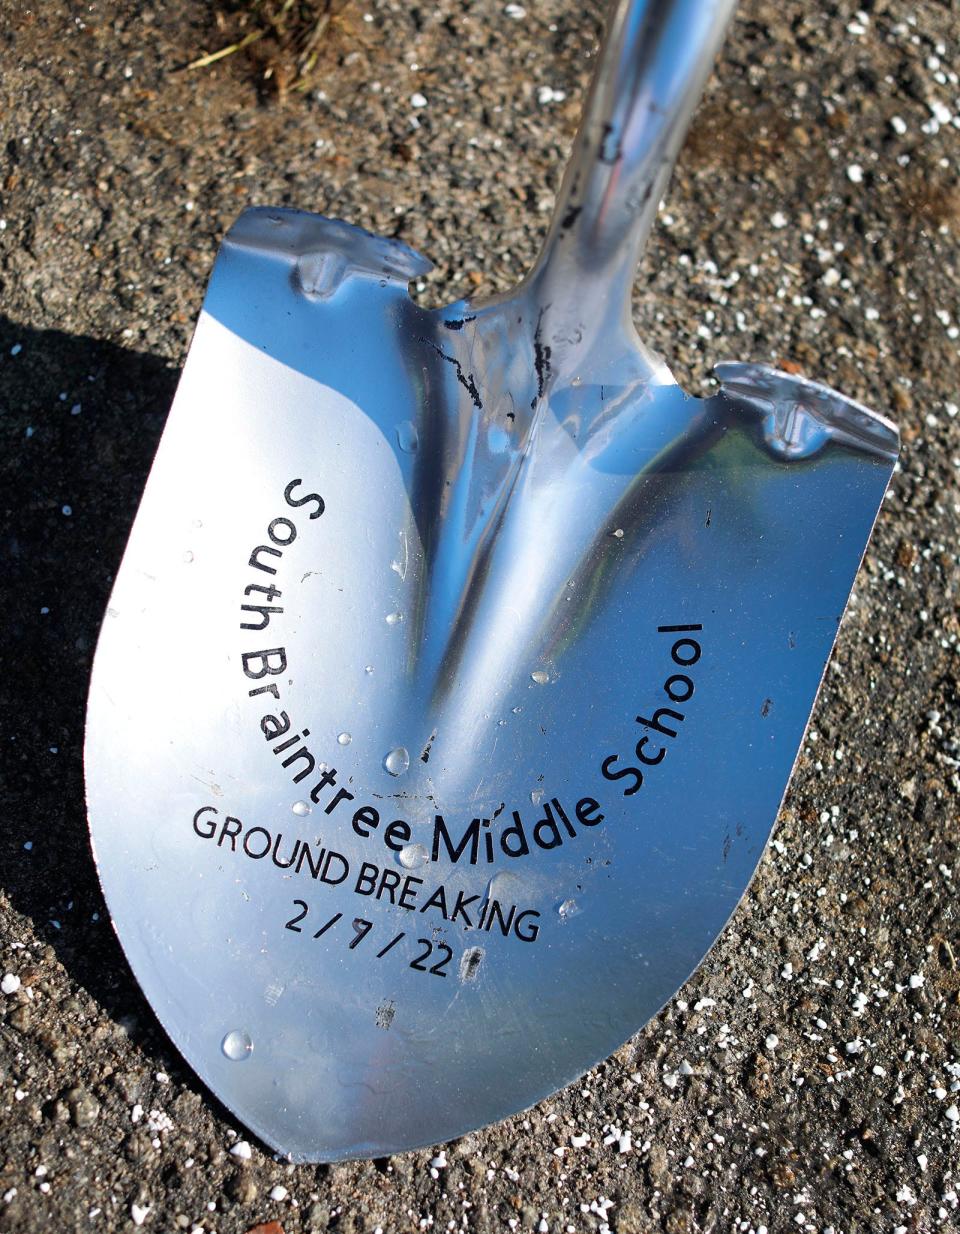 A groundbreaking for the new South Middle School in Braintree was held Wednesday, Feb. 9, 2022.